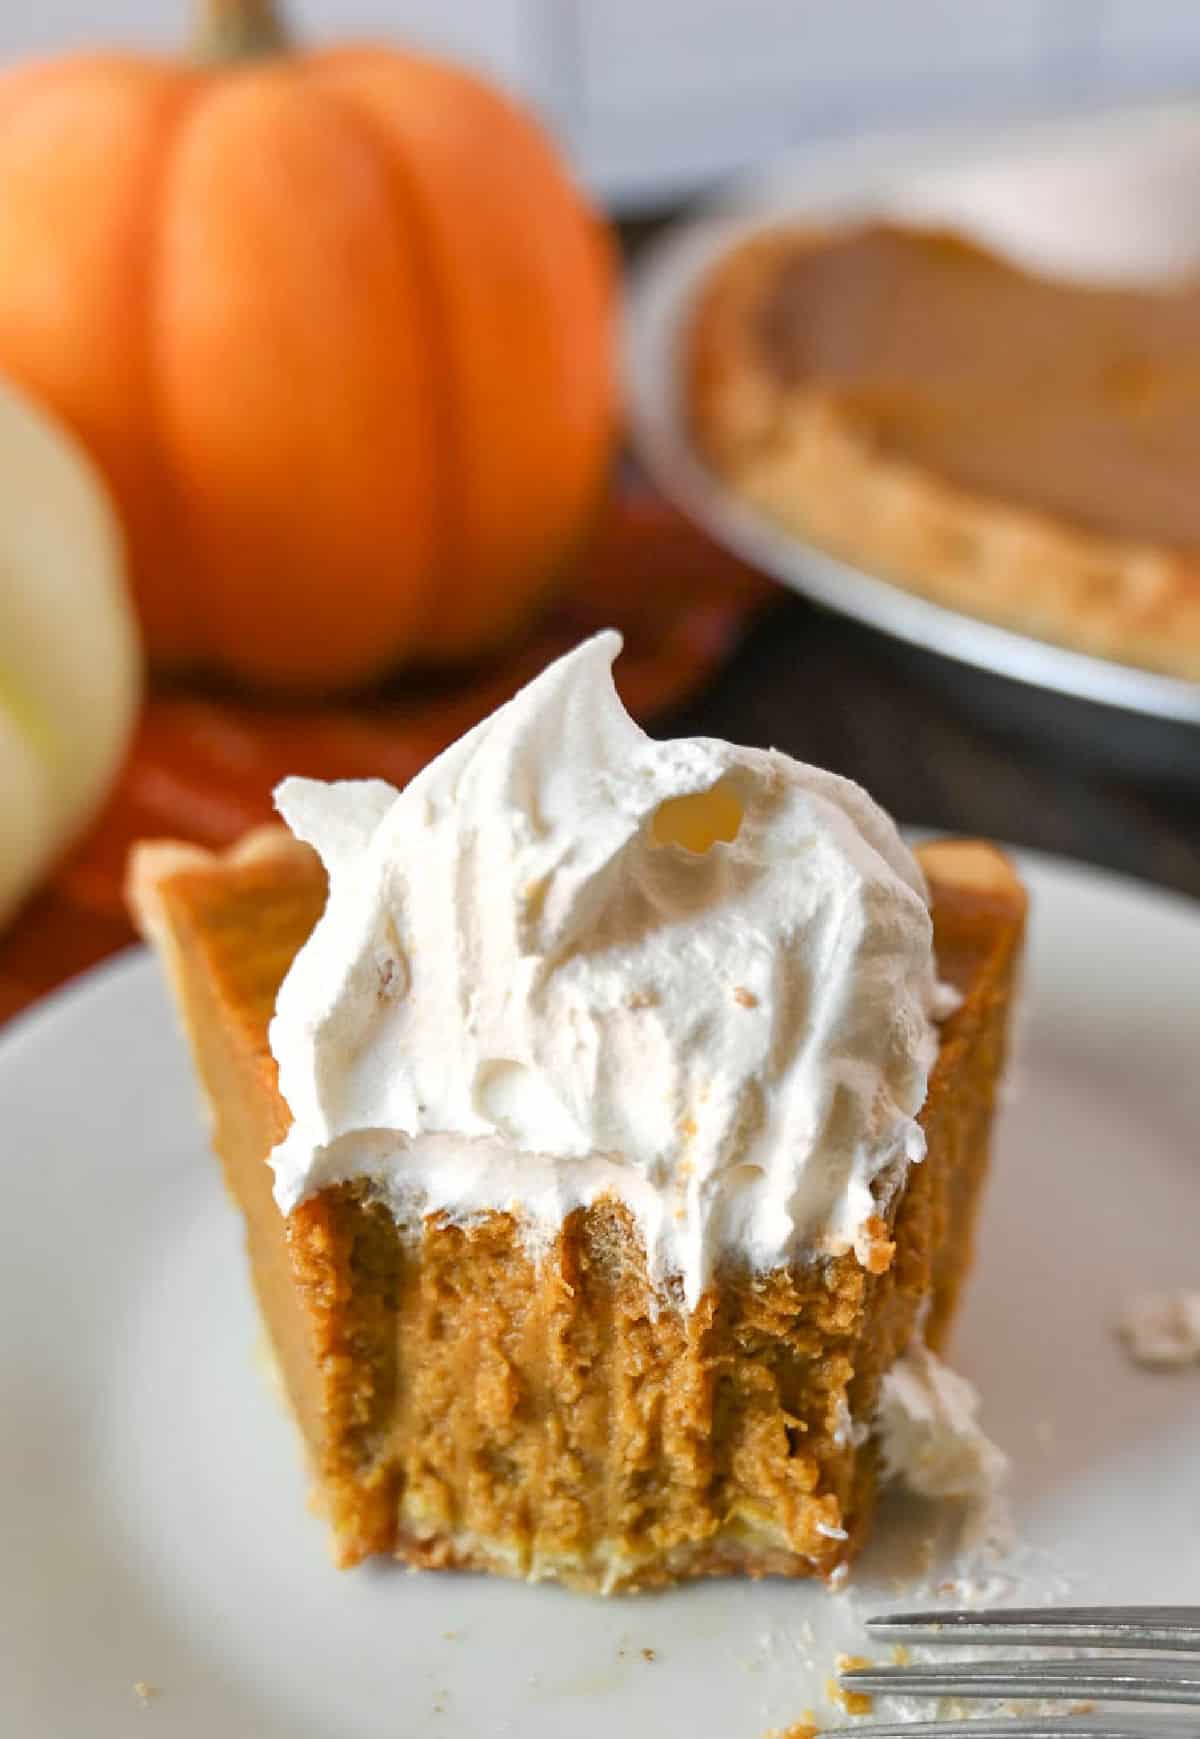 A slice of buttermilk pumpkin pie with a bute out of it.